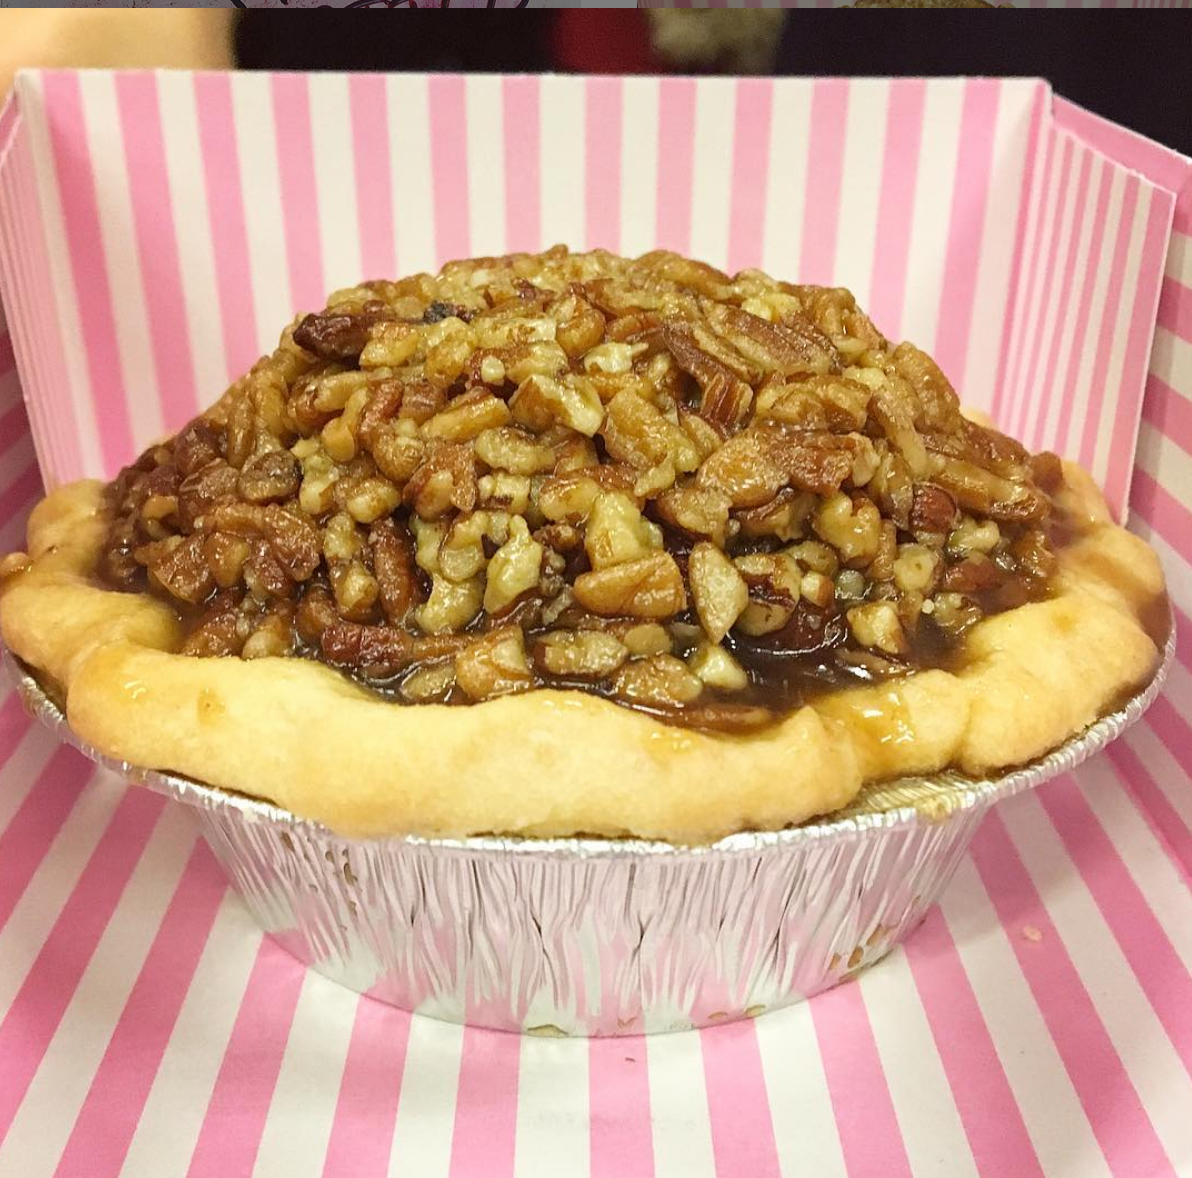 Pecan Pie from Sweets by CHLOE – from Instagram _eatupfornyc_